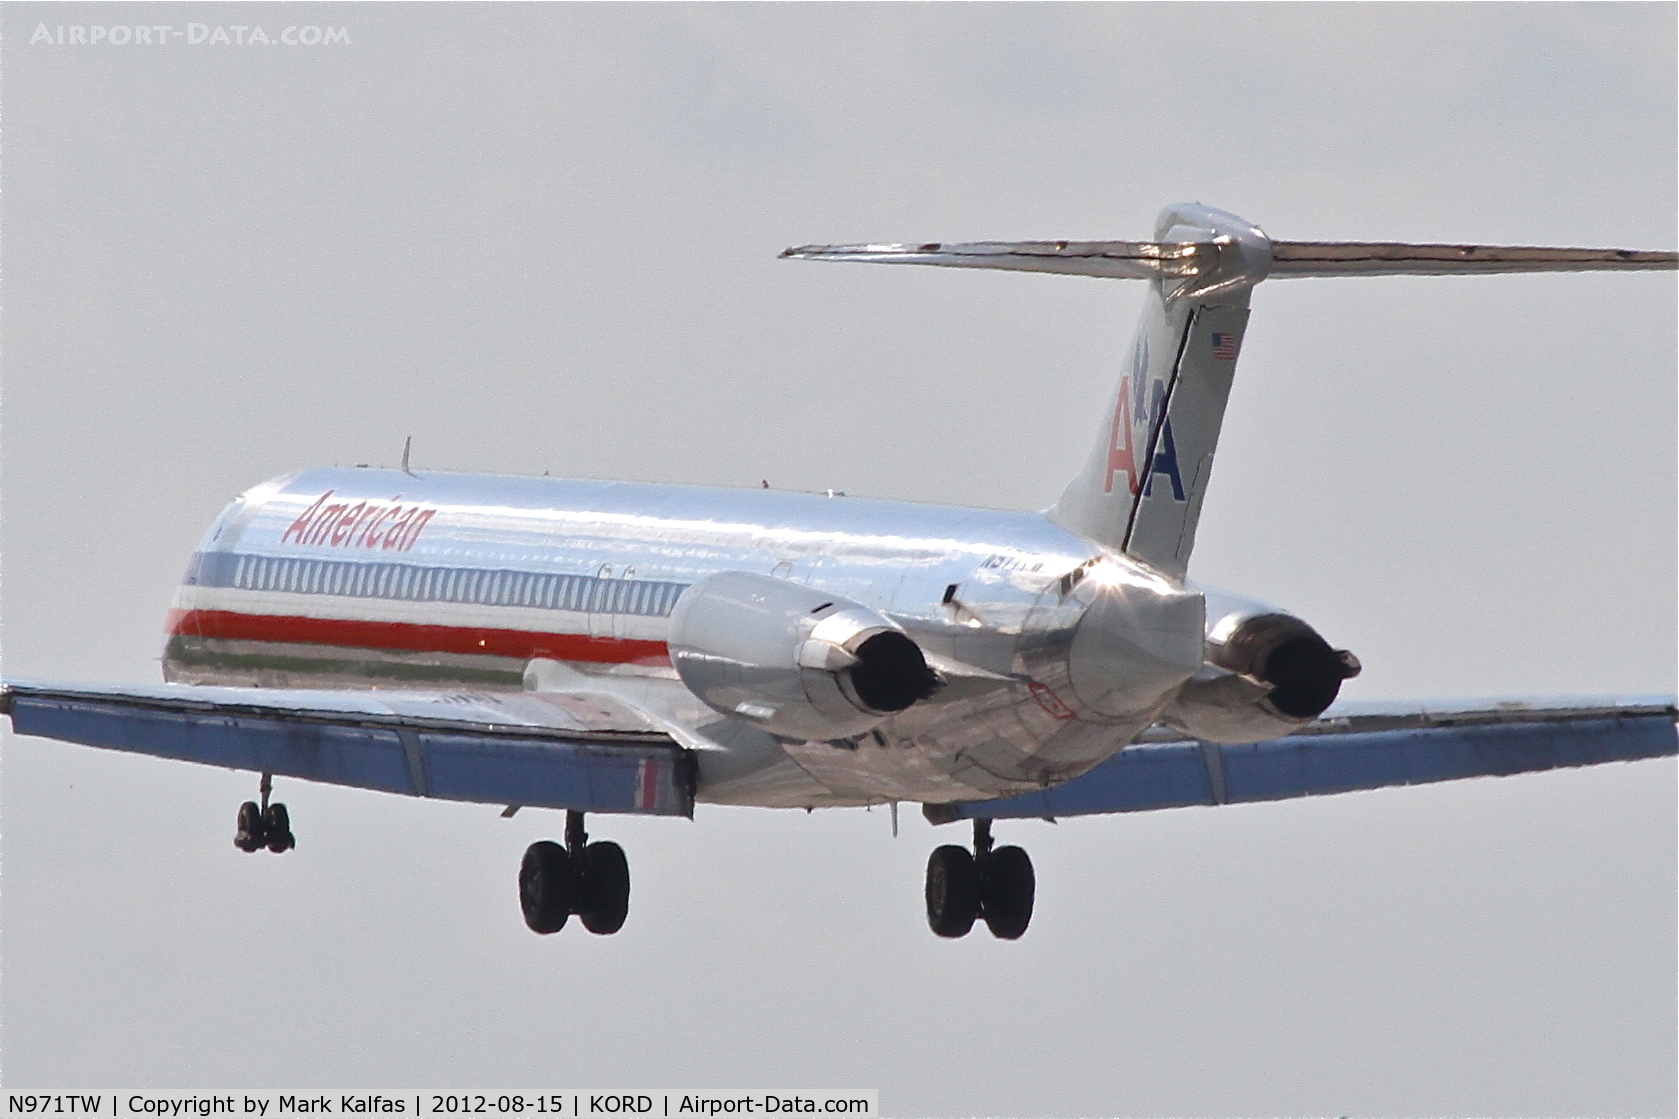 N971TW, 1999 McDonnell Douglas MD-83 (DC-9-83) C/N 53621, American Airlines Mcdonnell Douglas DC-9-83, AAL2354 arriving from Dallas/DFW, RWY 28 approach KORD.